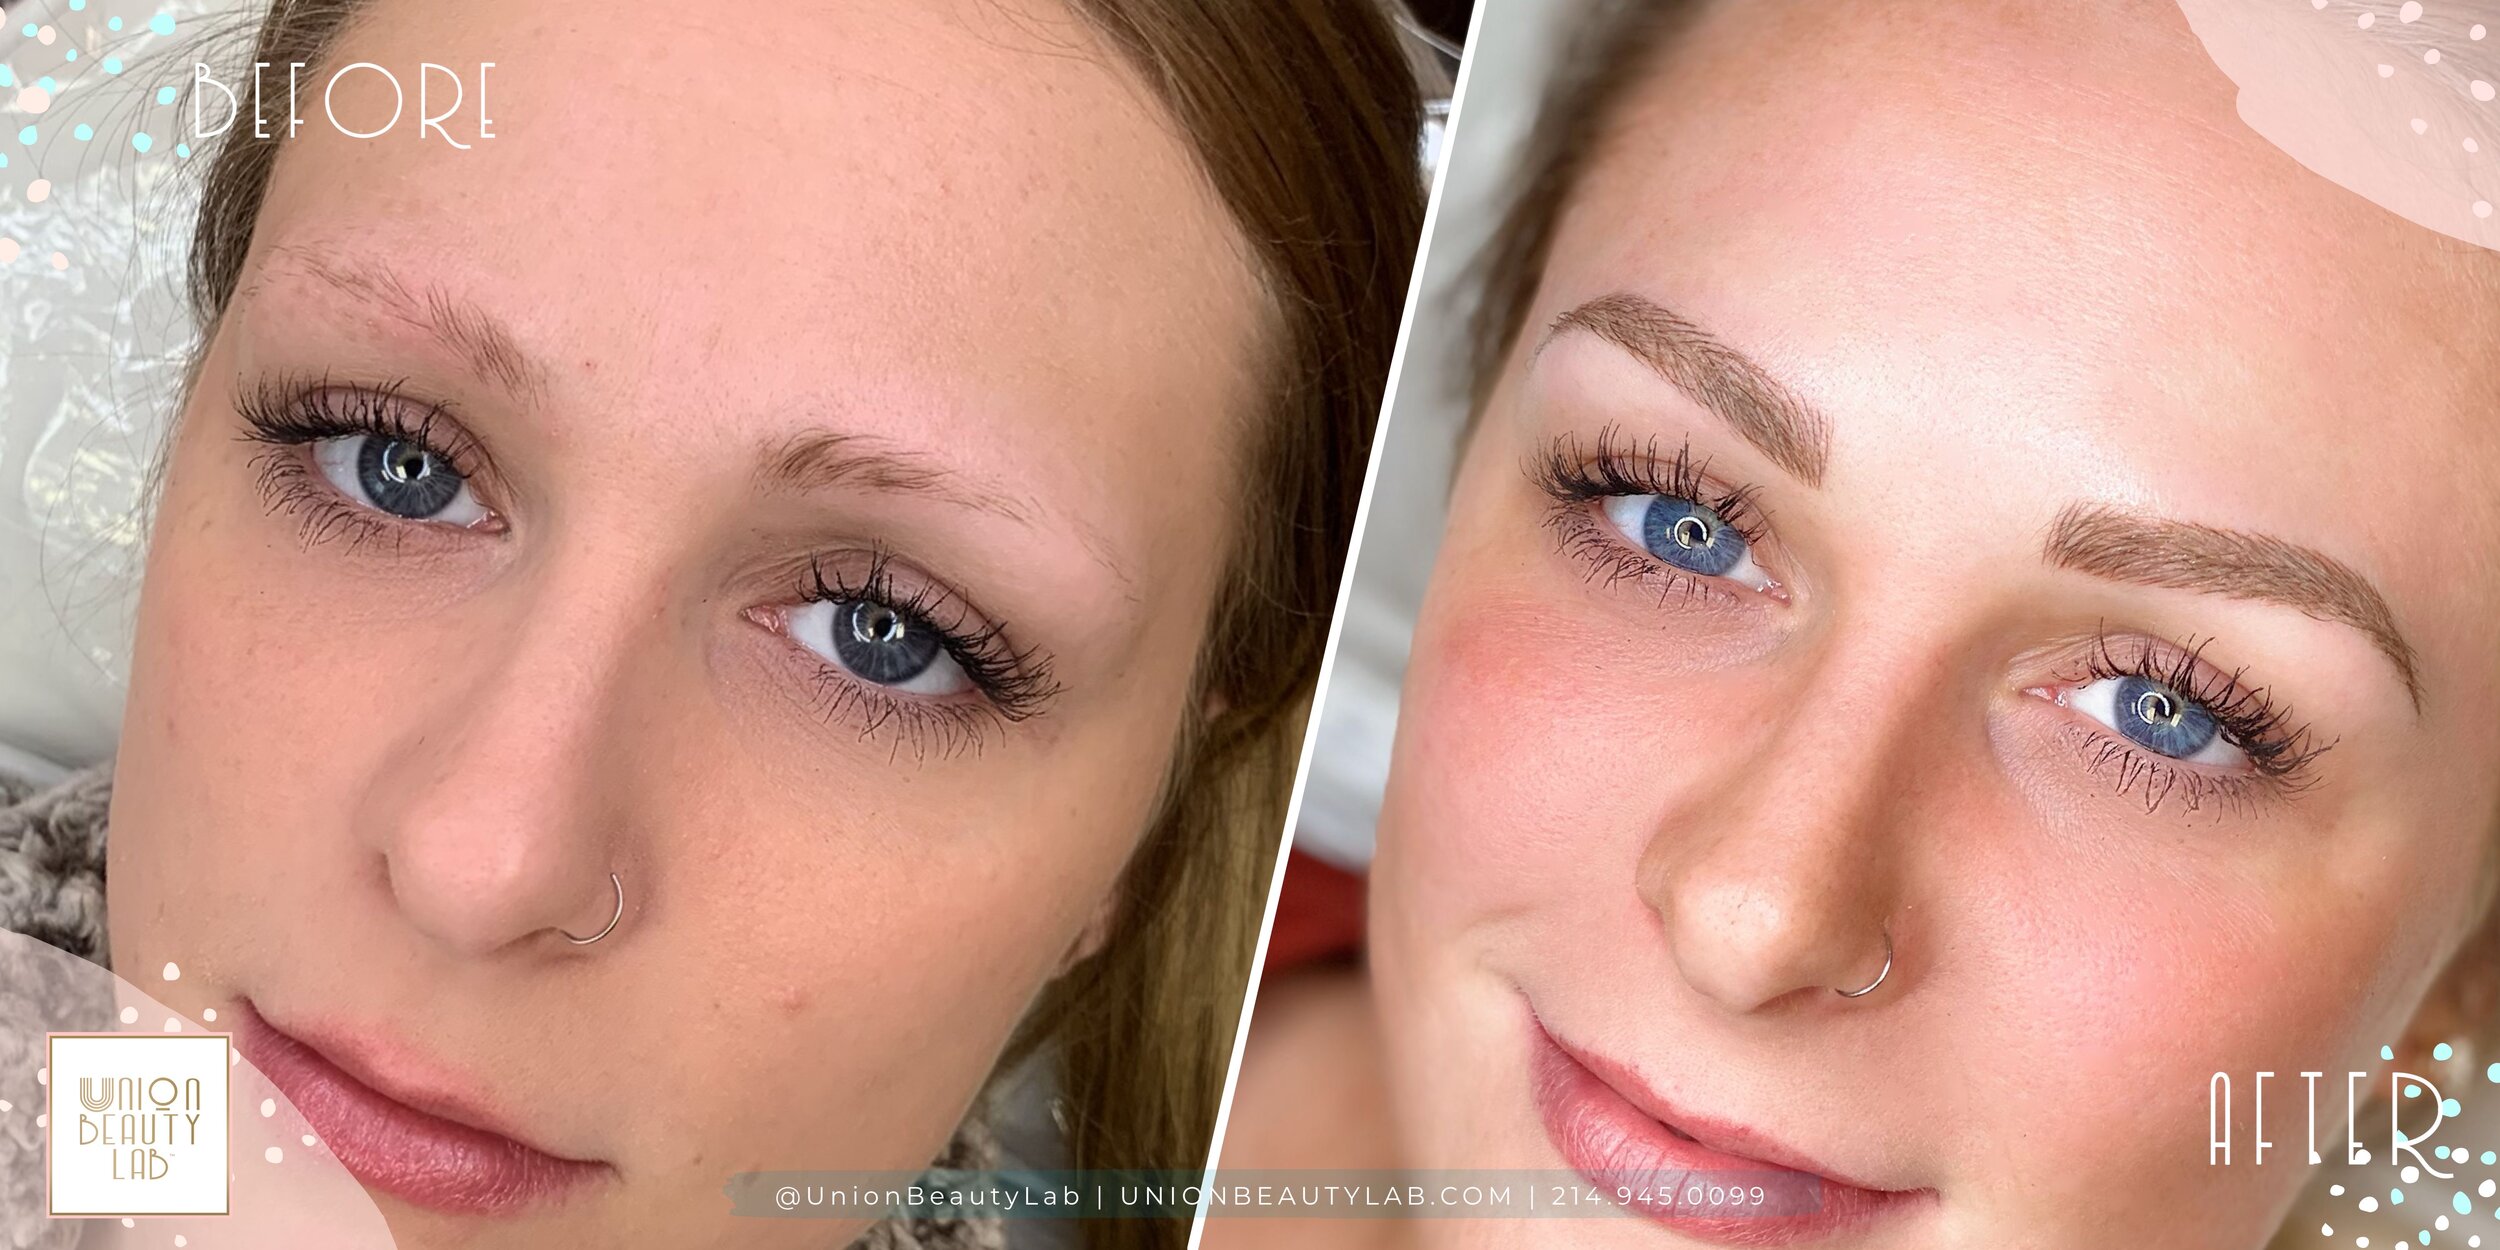 2149450099 Union Beauty Lab Advanced Microblading Cosmetic Tattooing Dallas Blonde 3.JPG